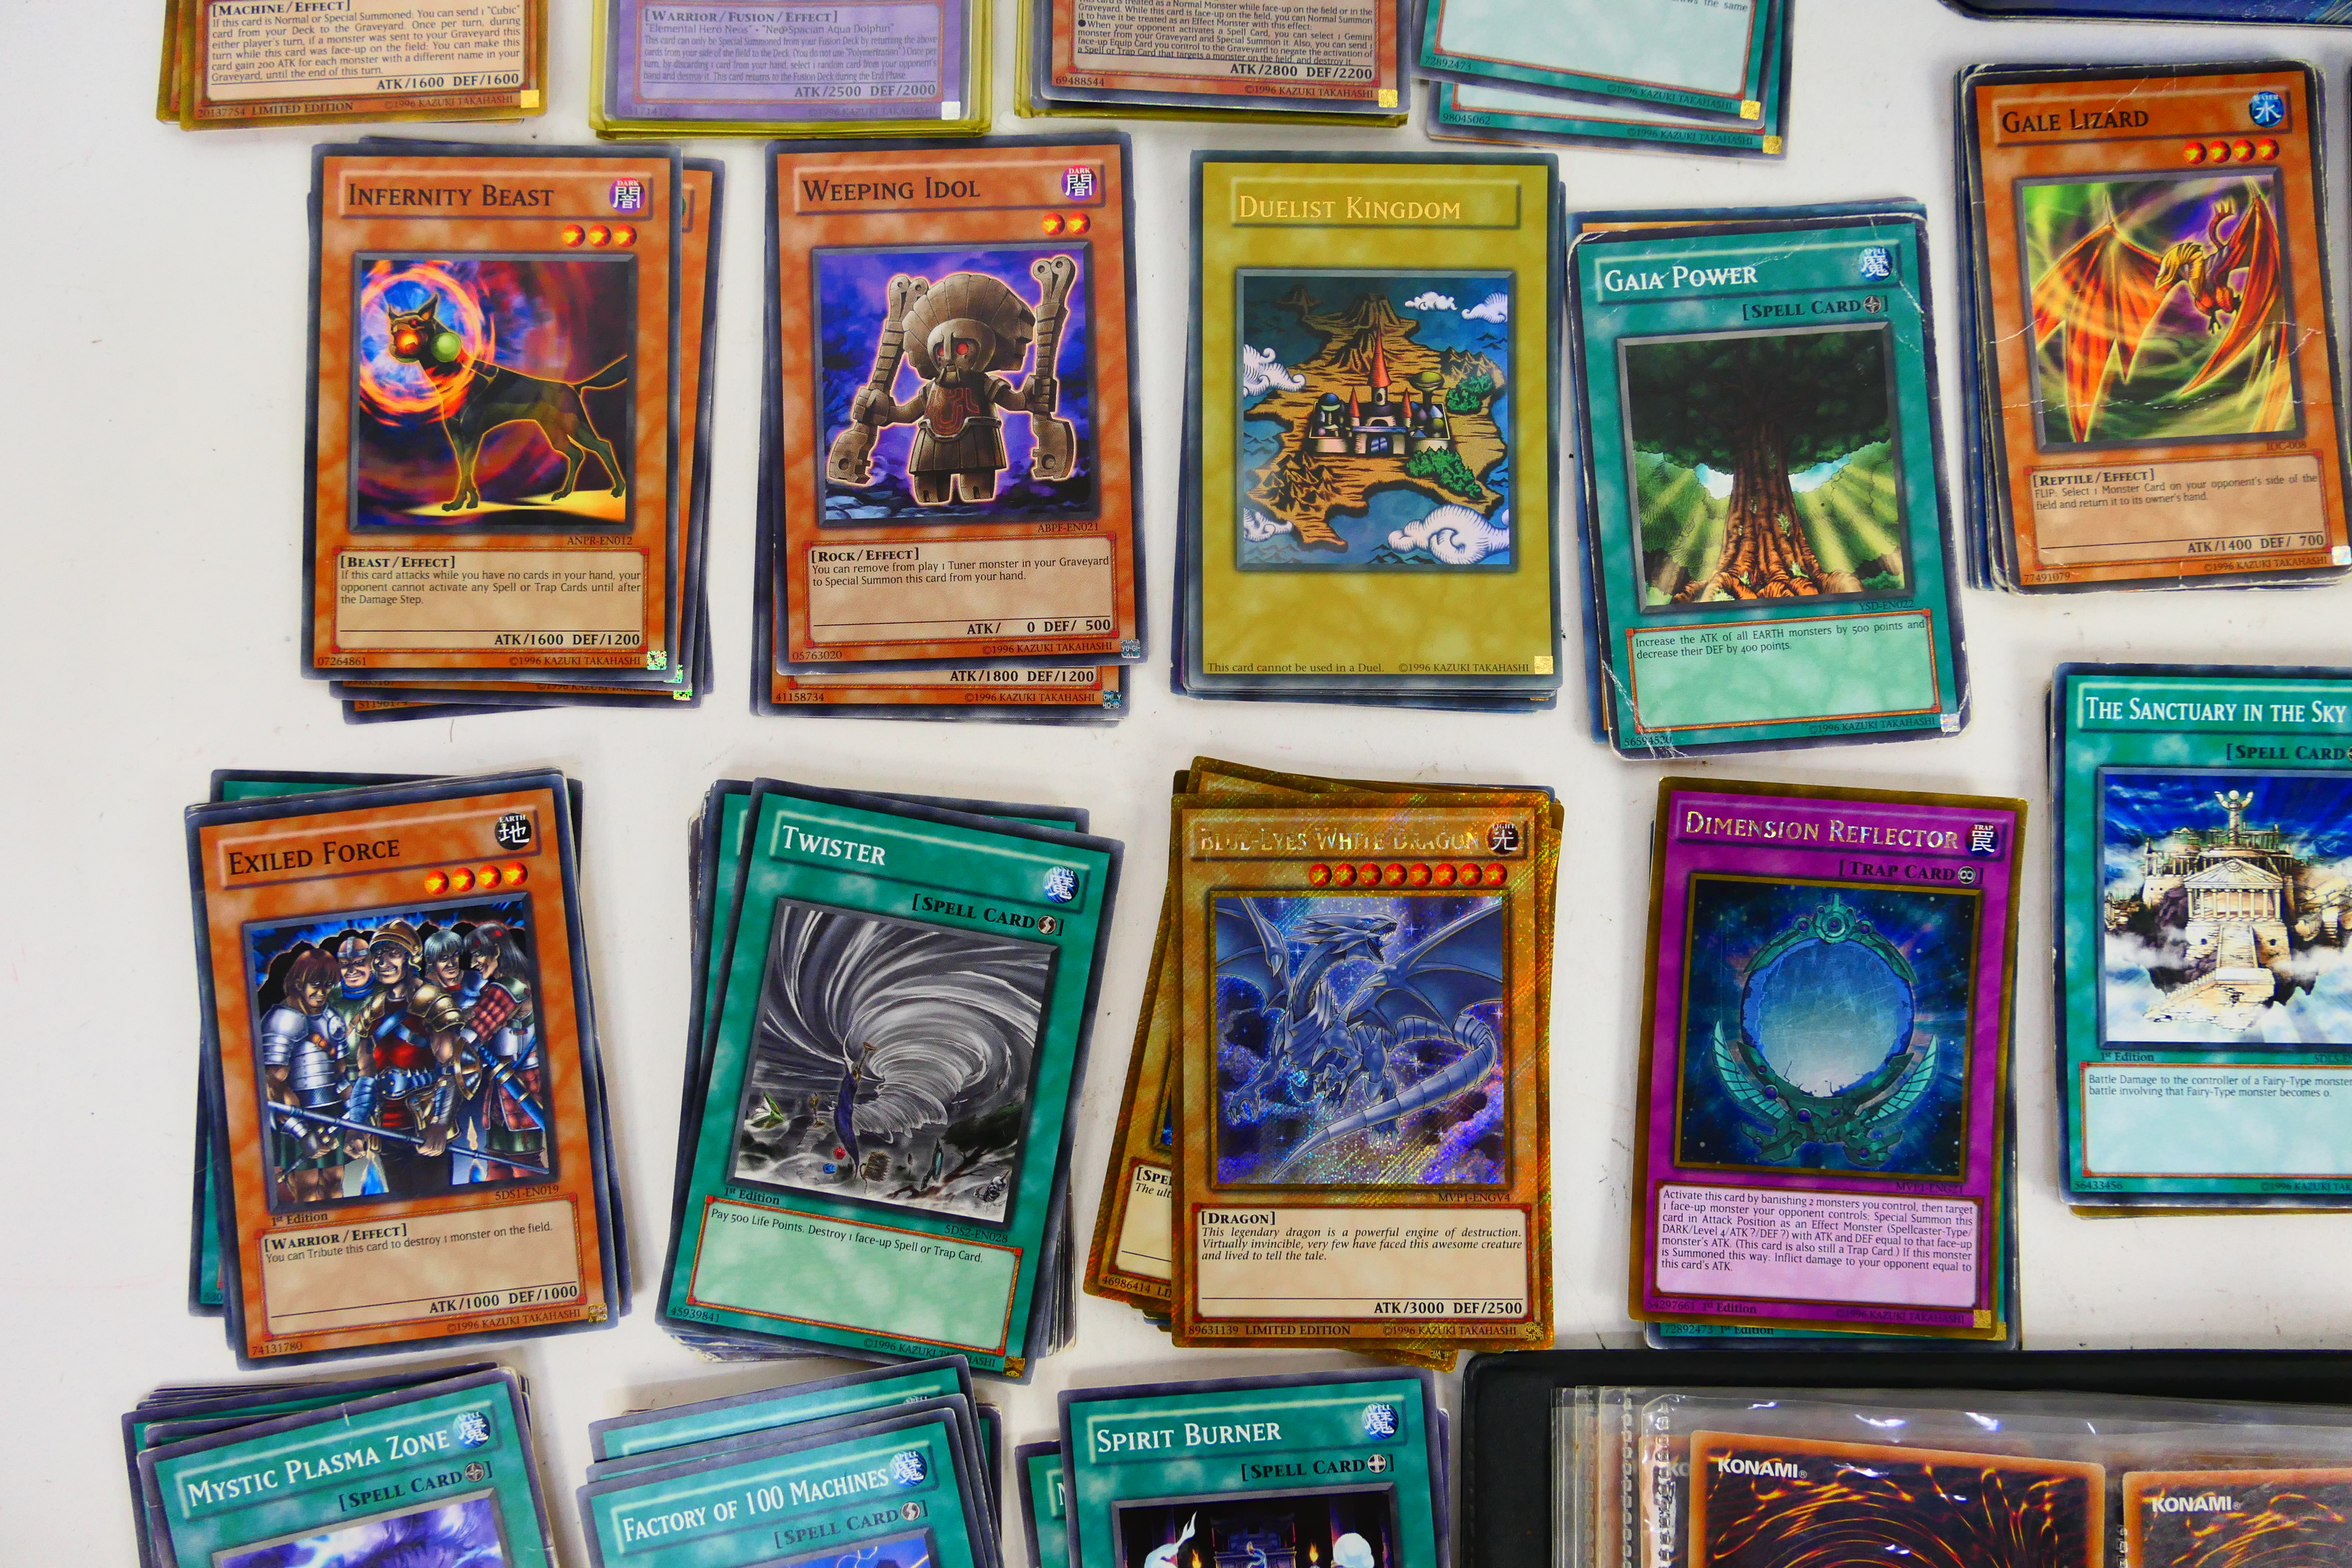 Yu-Gi-Oh! - A YuGiOh 5D's tin and folder - Image 3 of 12